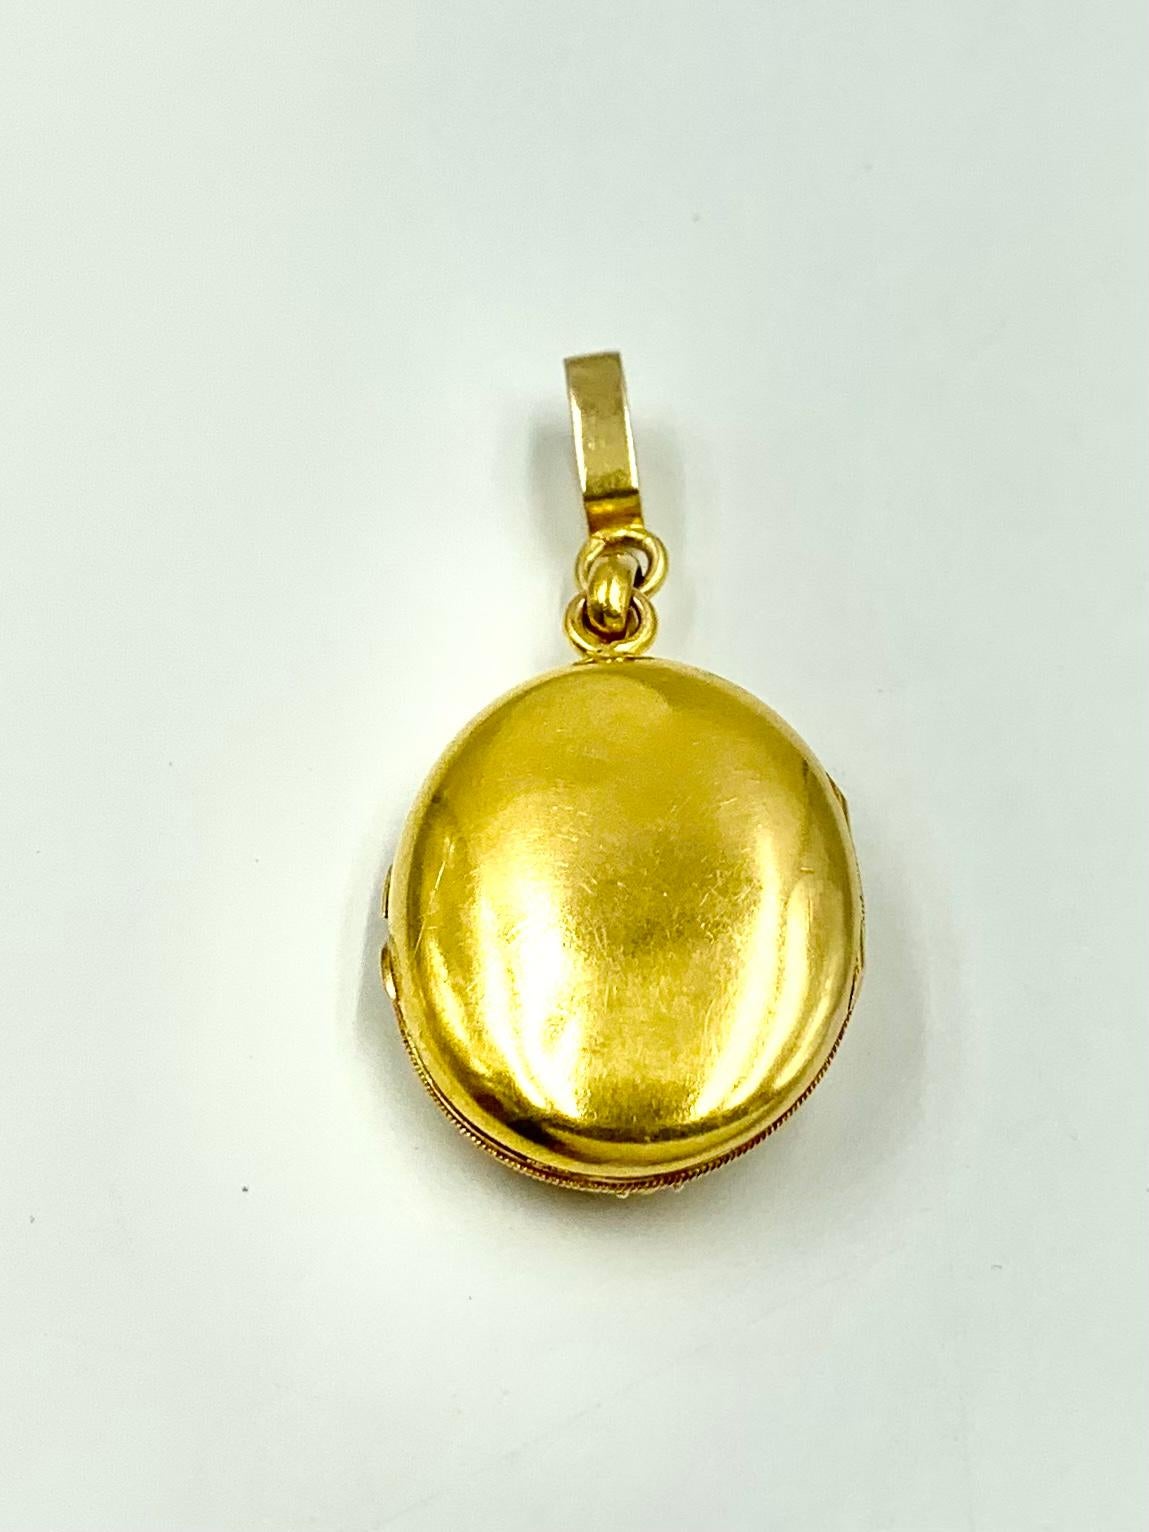 Rare Etruscan Revival 18K Gold Locket Necklace attr. Eugene Fontenay, Paris 1870 In Good Condition For Sale In New York, NY